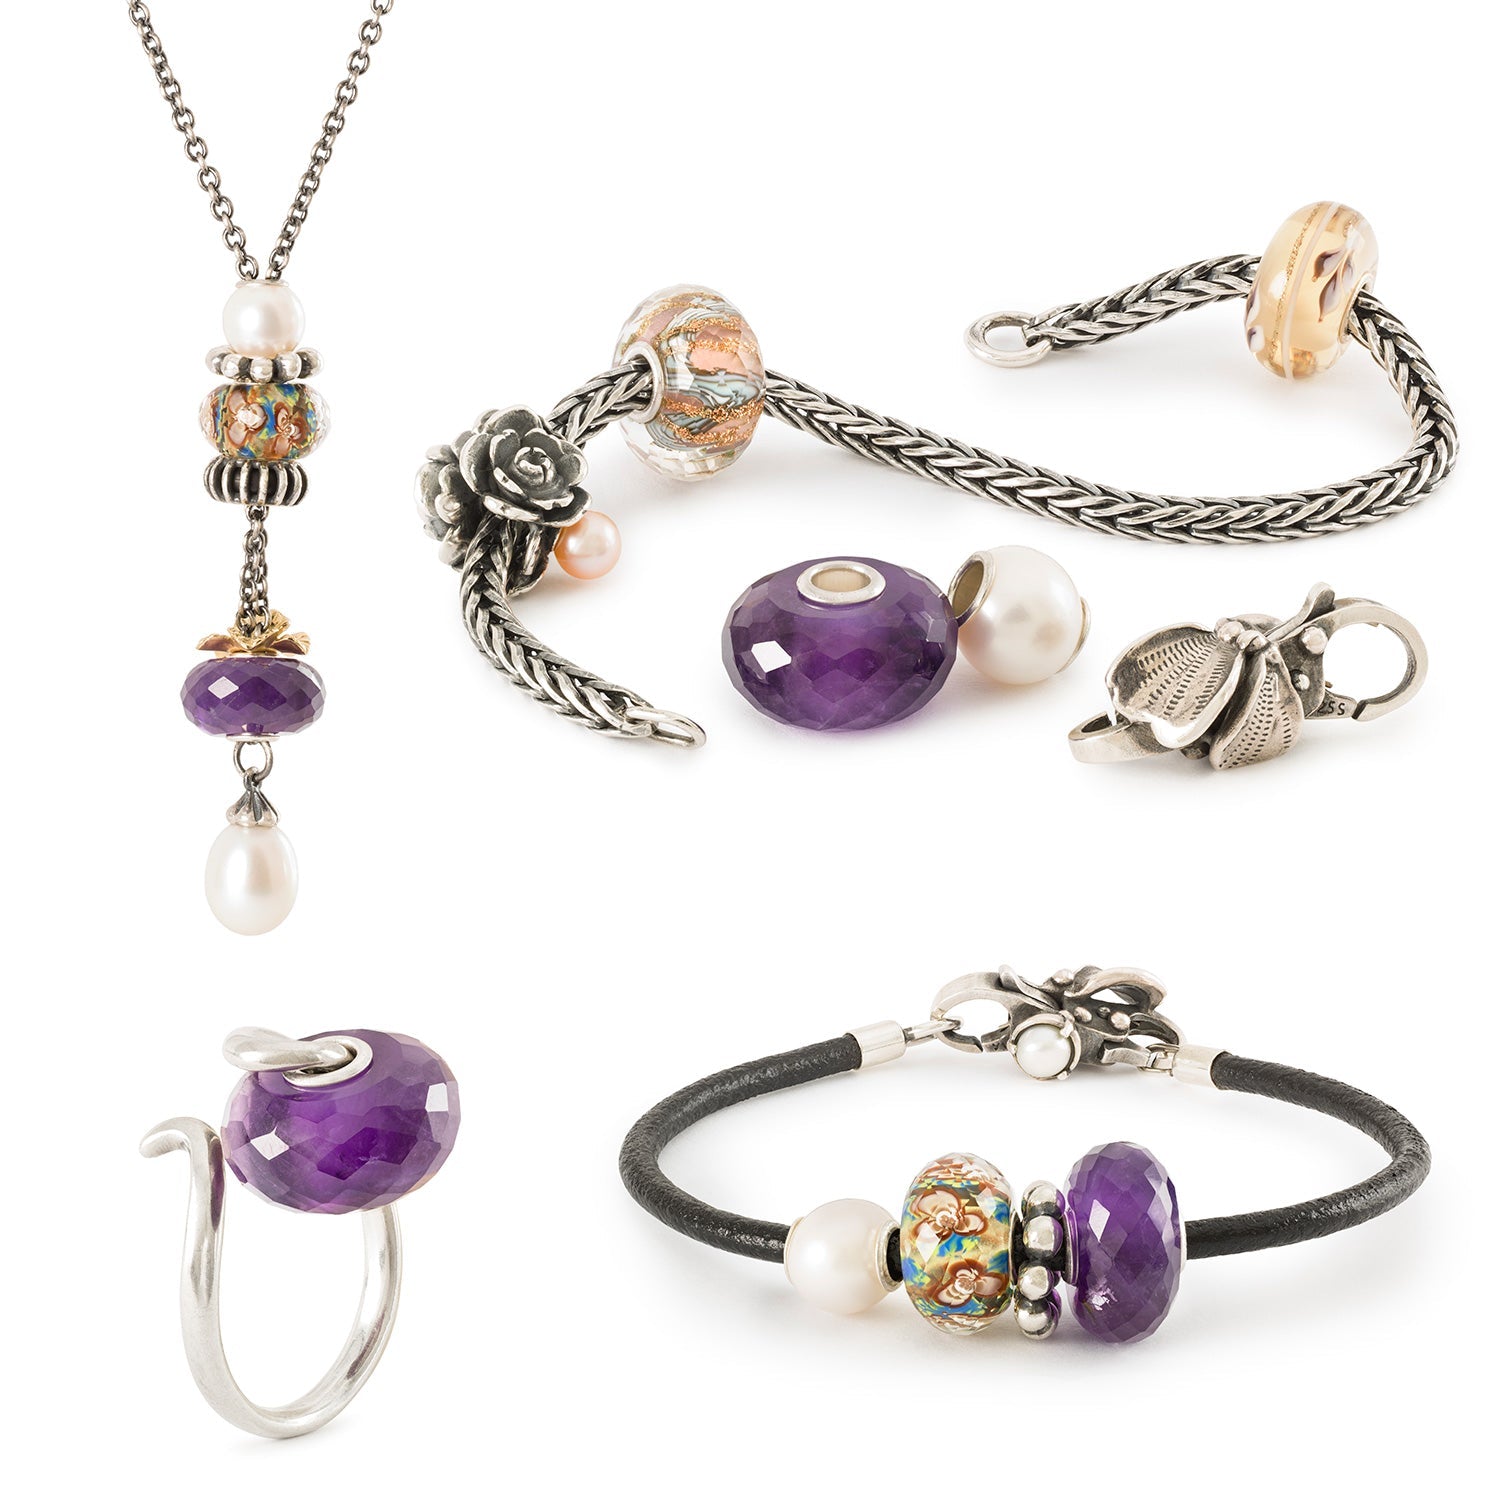 Trollbeads Amethyst bead on different jewellery, necklace, silver bracelet, leather bracelet, silver ring, with complementing beads.